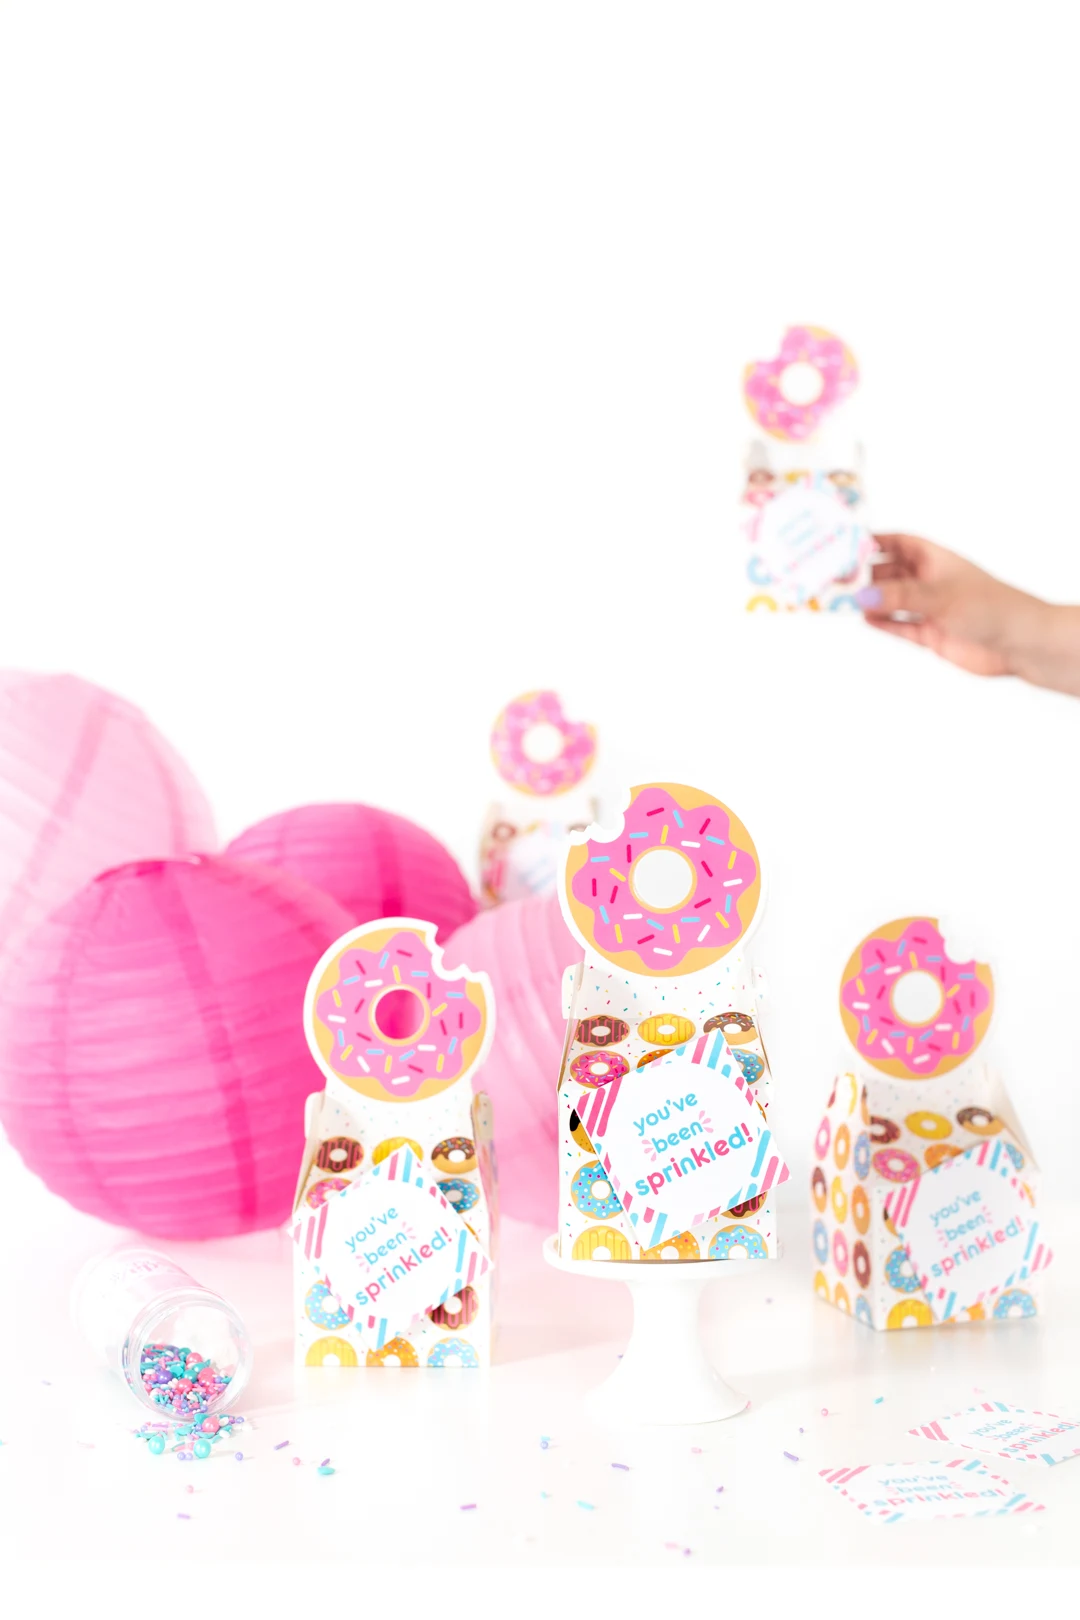 donut gift ideas for donut lovers. cute little tiny donut favor boxes for gifting donuts